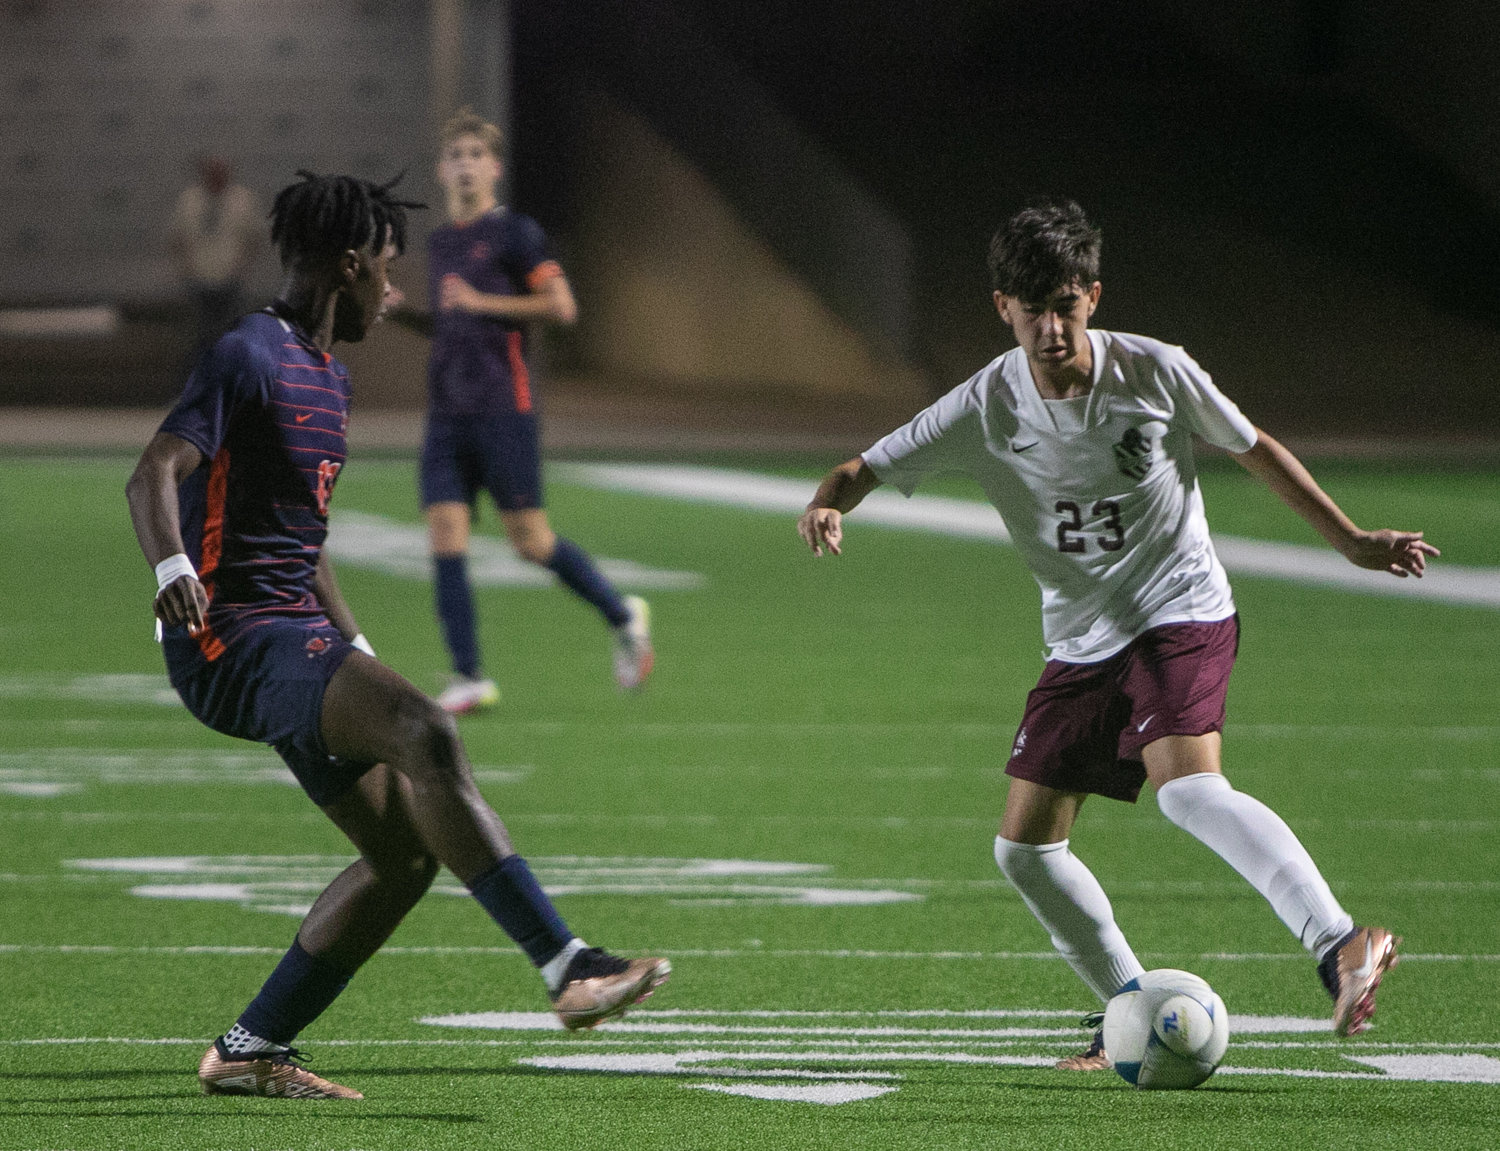 Noah Bosso dribbles around a player during Friday's Class 6A Regional Quarterfinal game between Seven Lakes and Cinco Ranch at Legacy Stadium.